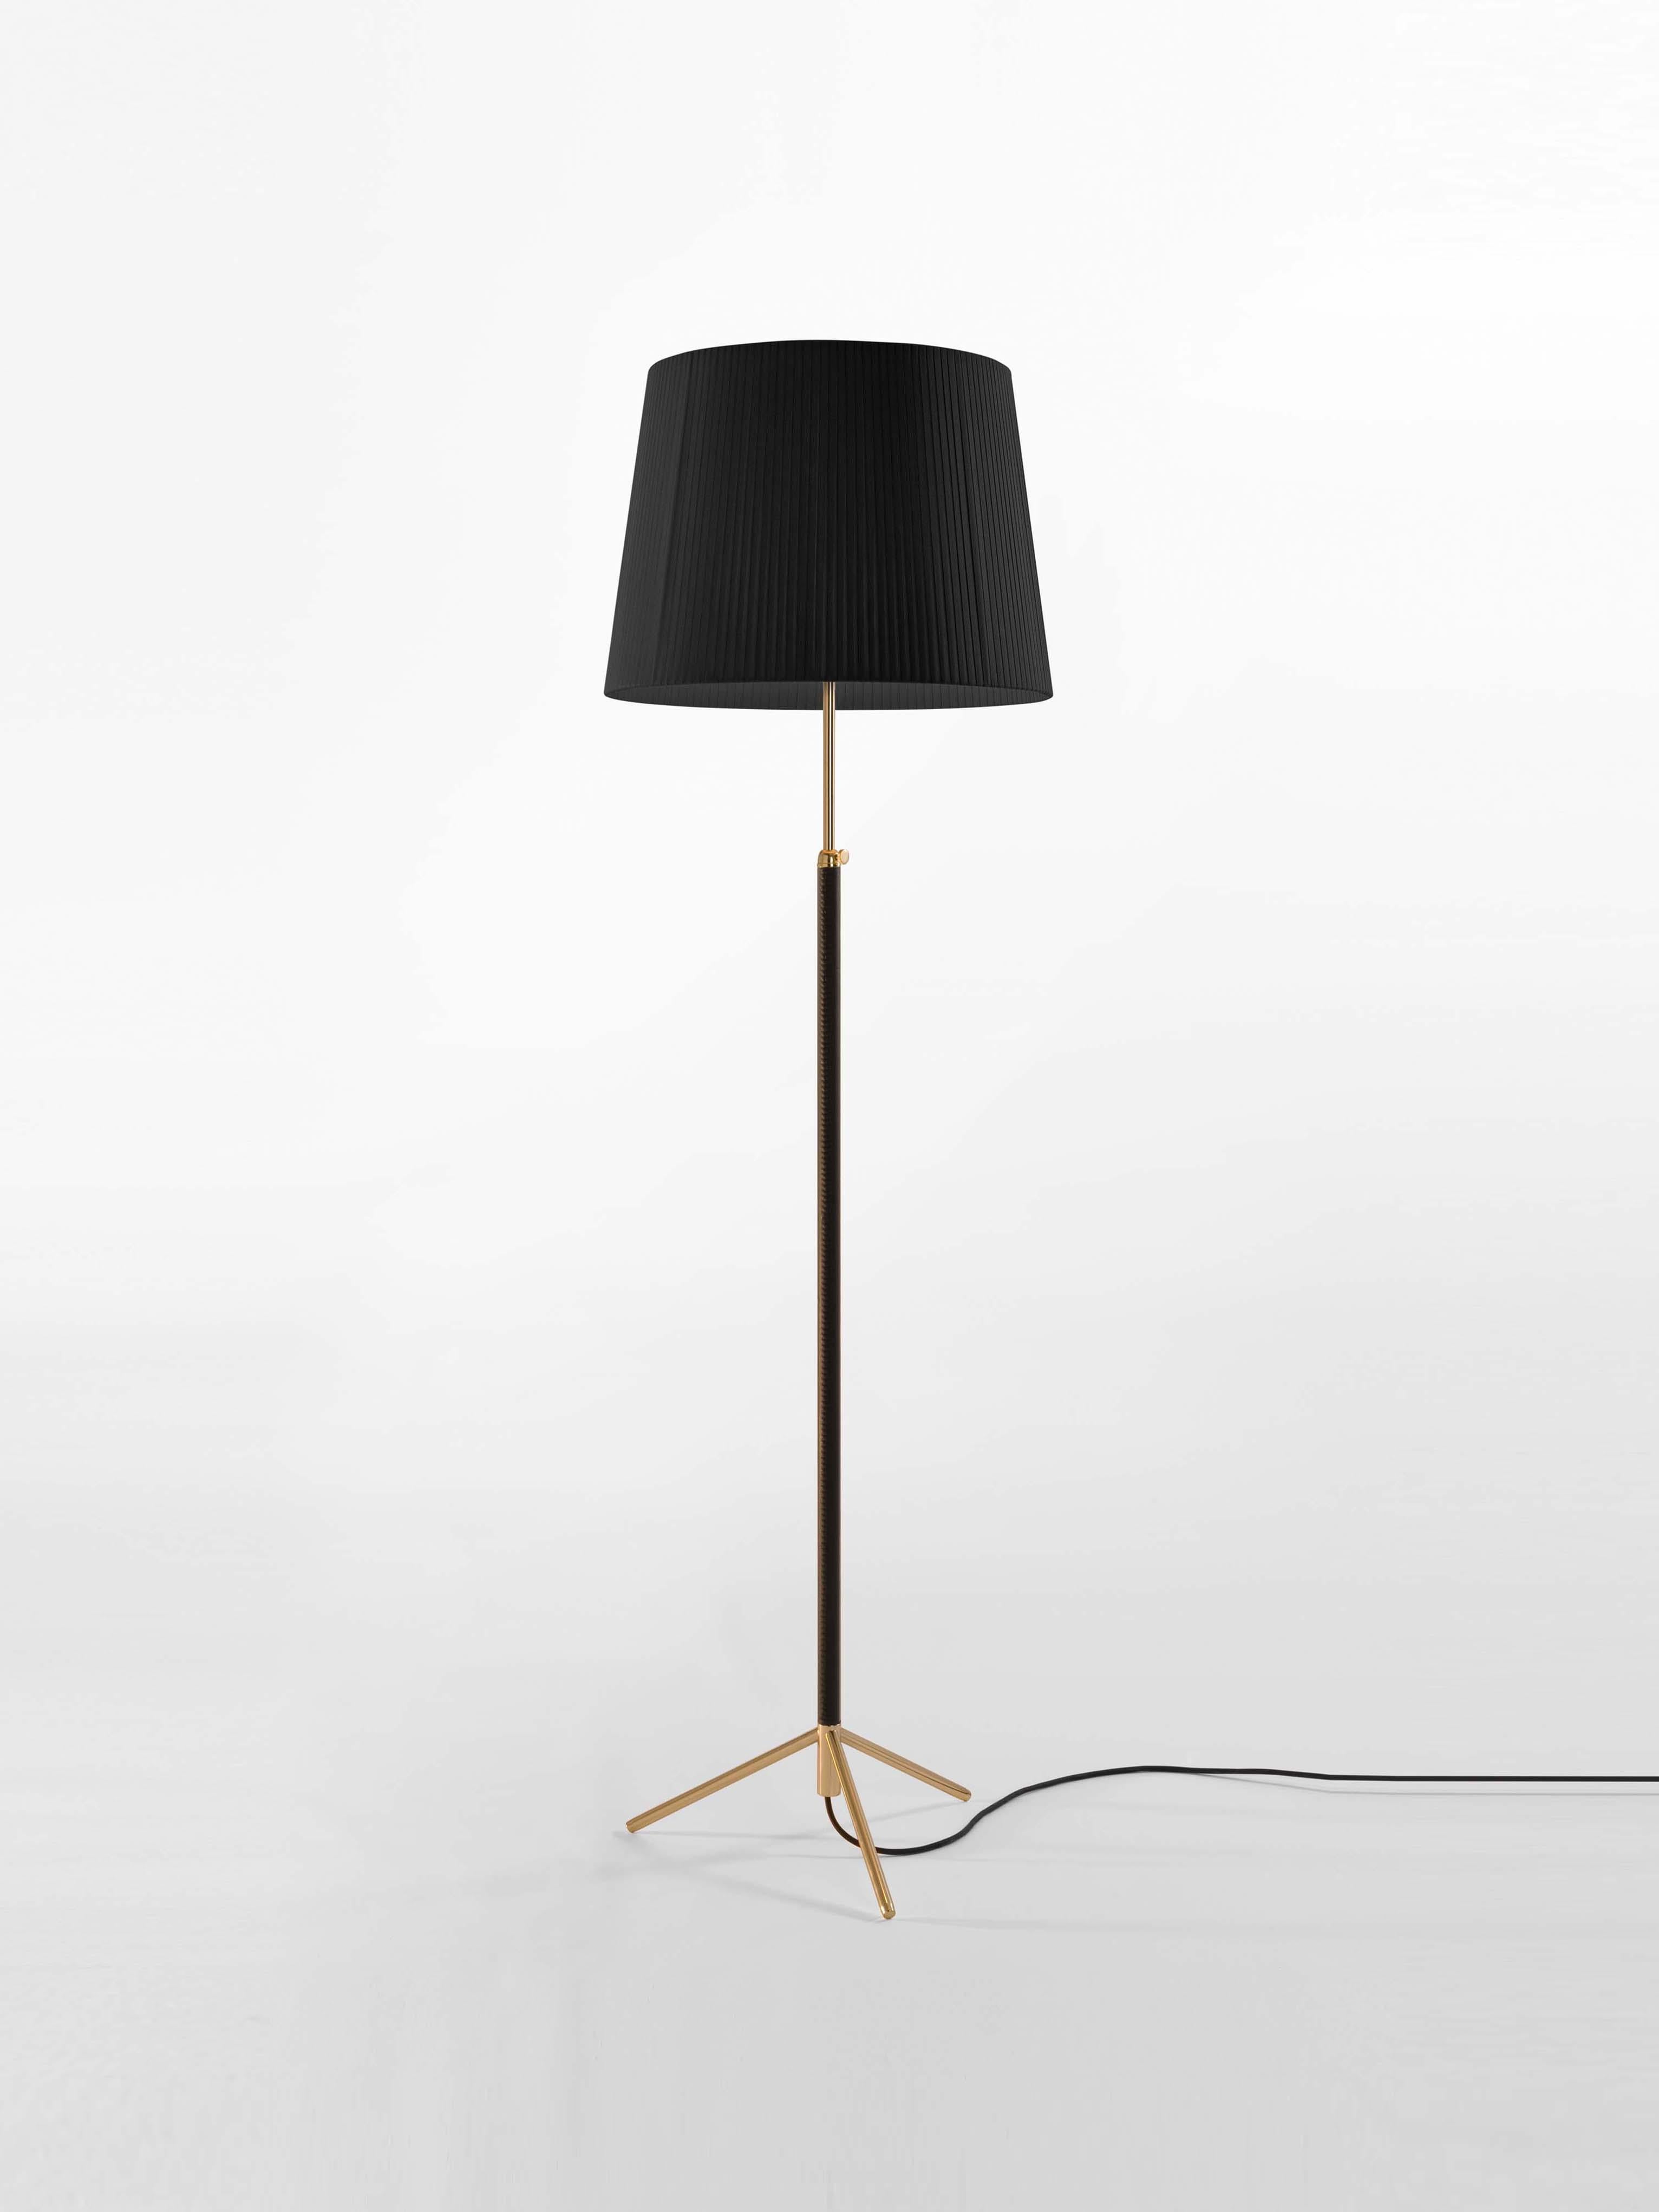 Black and brass Pie de Salón G1 floor lamp by Jaume Sans
Dimensions: D 45 x H 120-160 cm
Materials: Metal, leather, ribbon.
Available in chrome-plated or polished brass structure.
Available in other shade colors and sizes.

This slender